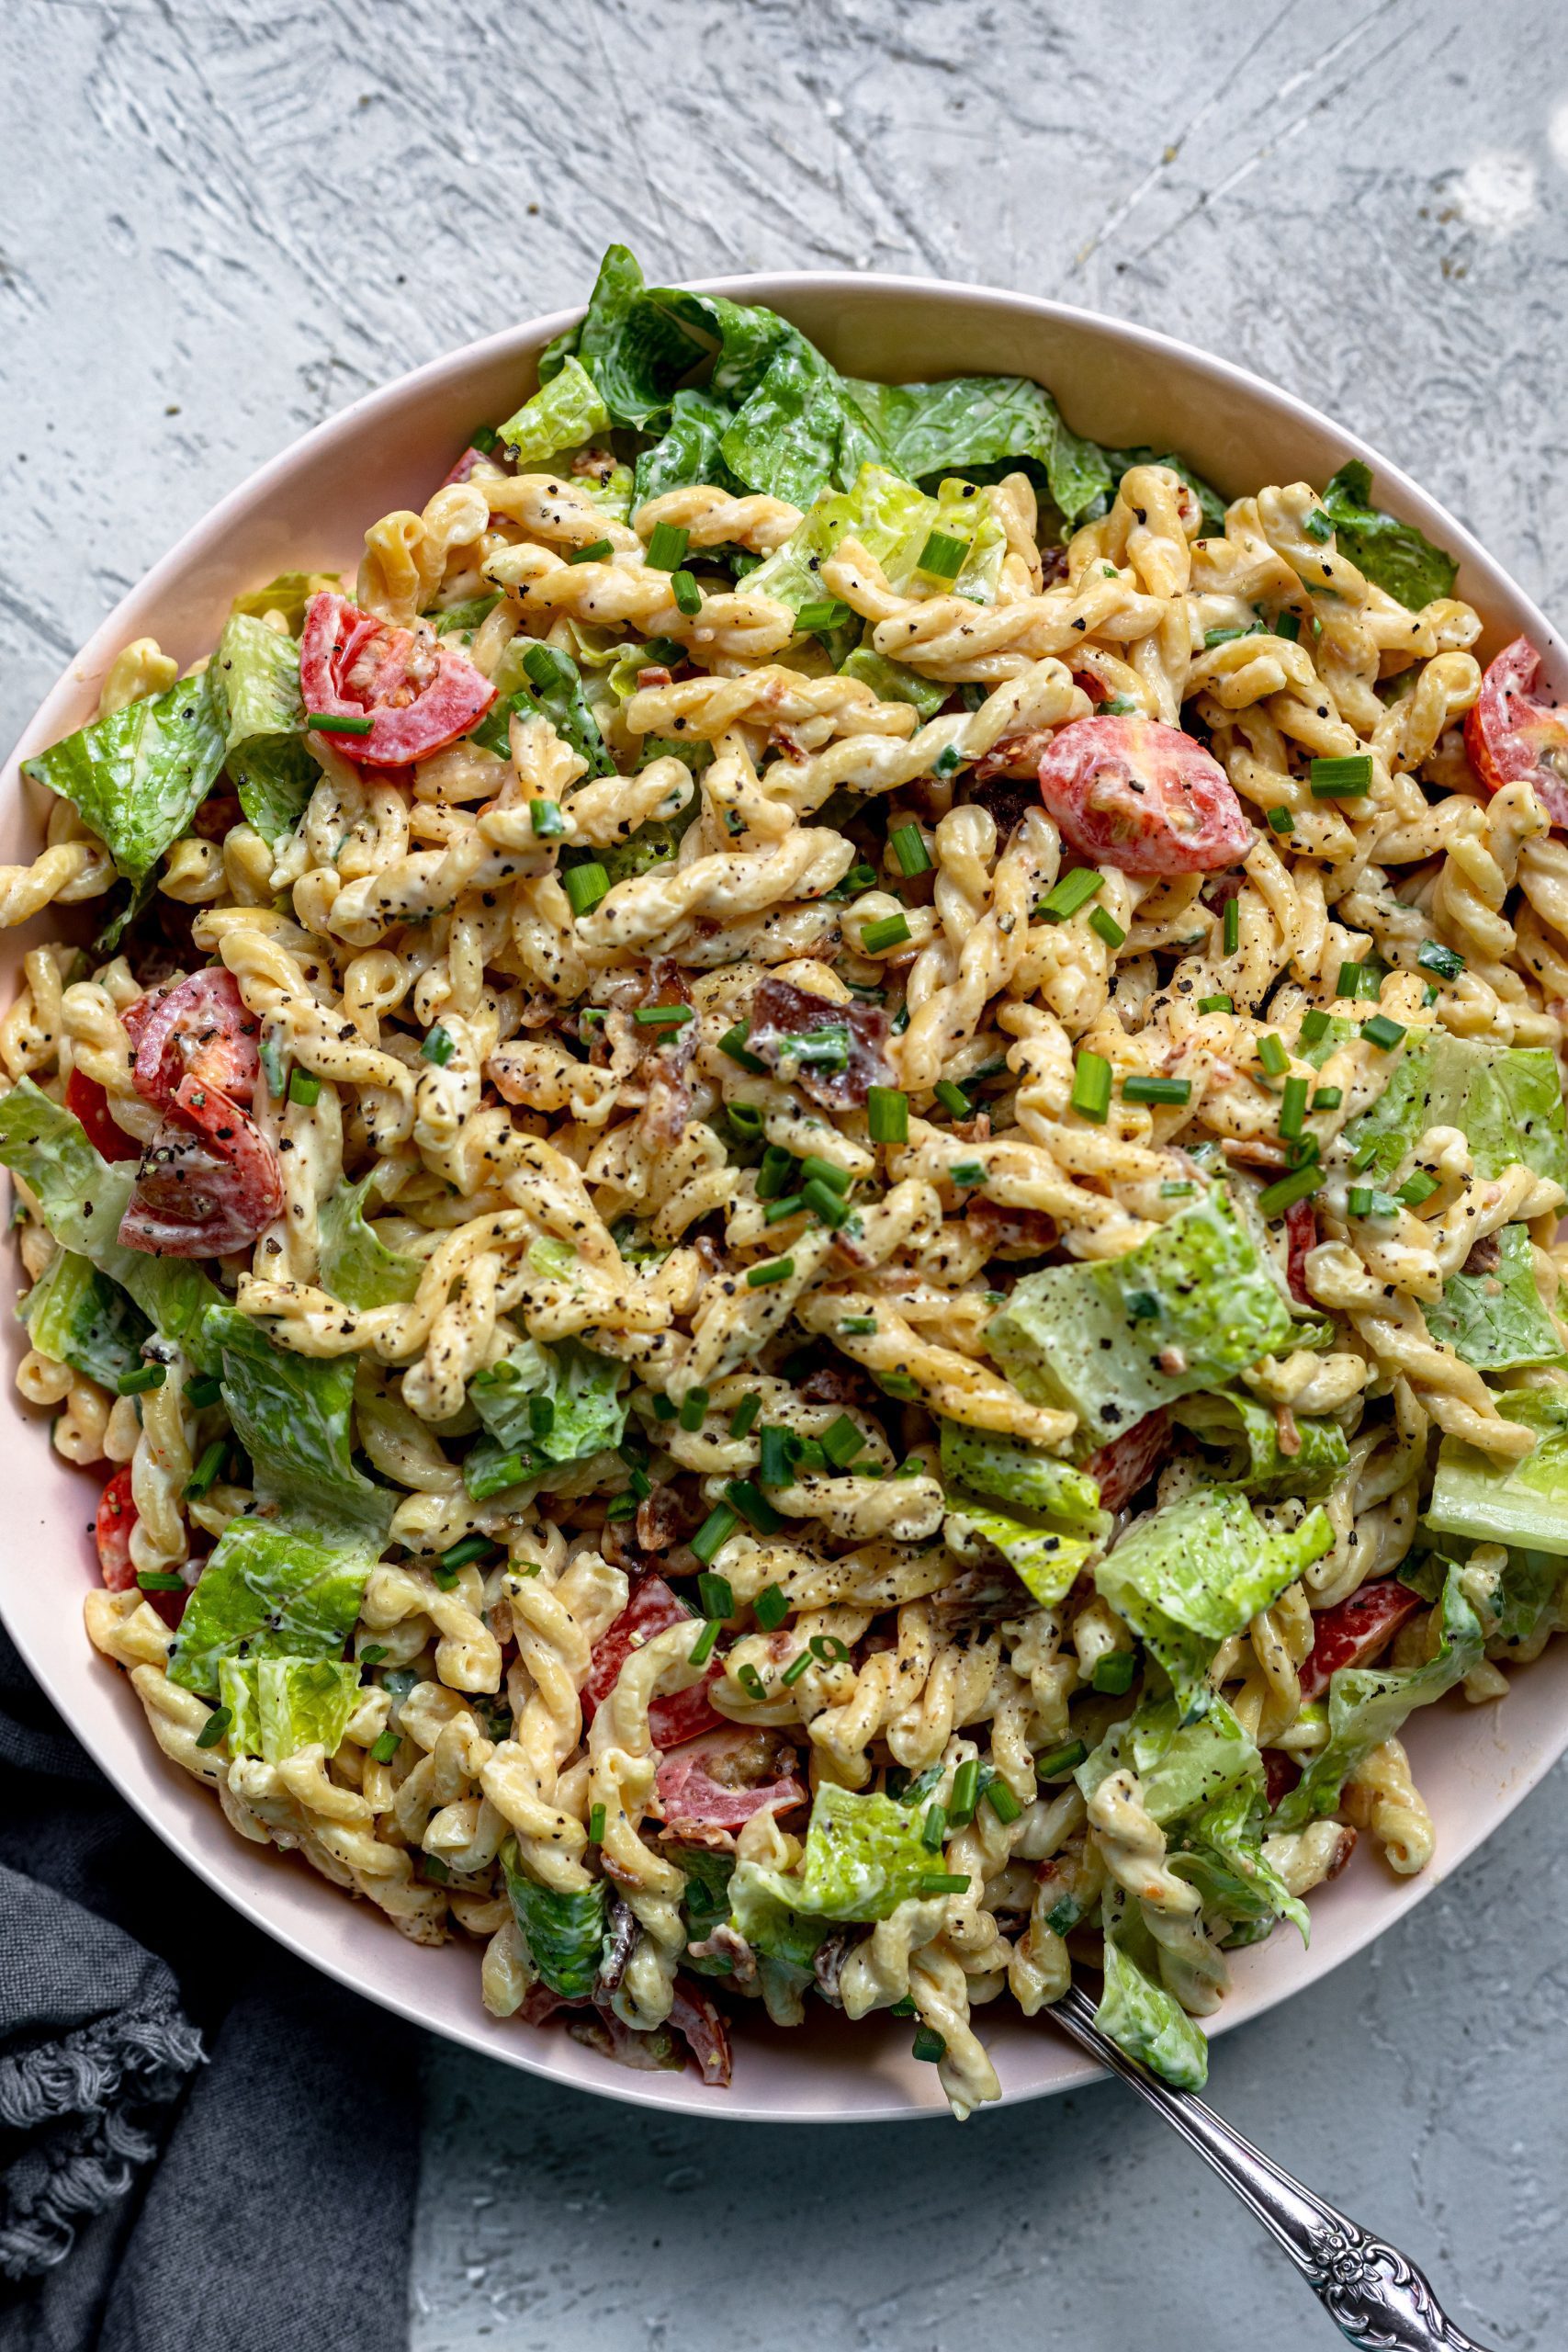 blt pasta salad with chive dressing